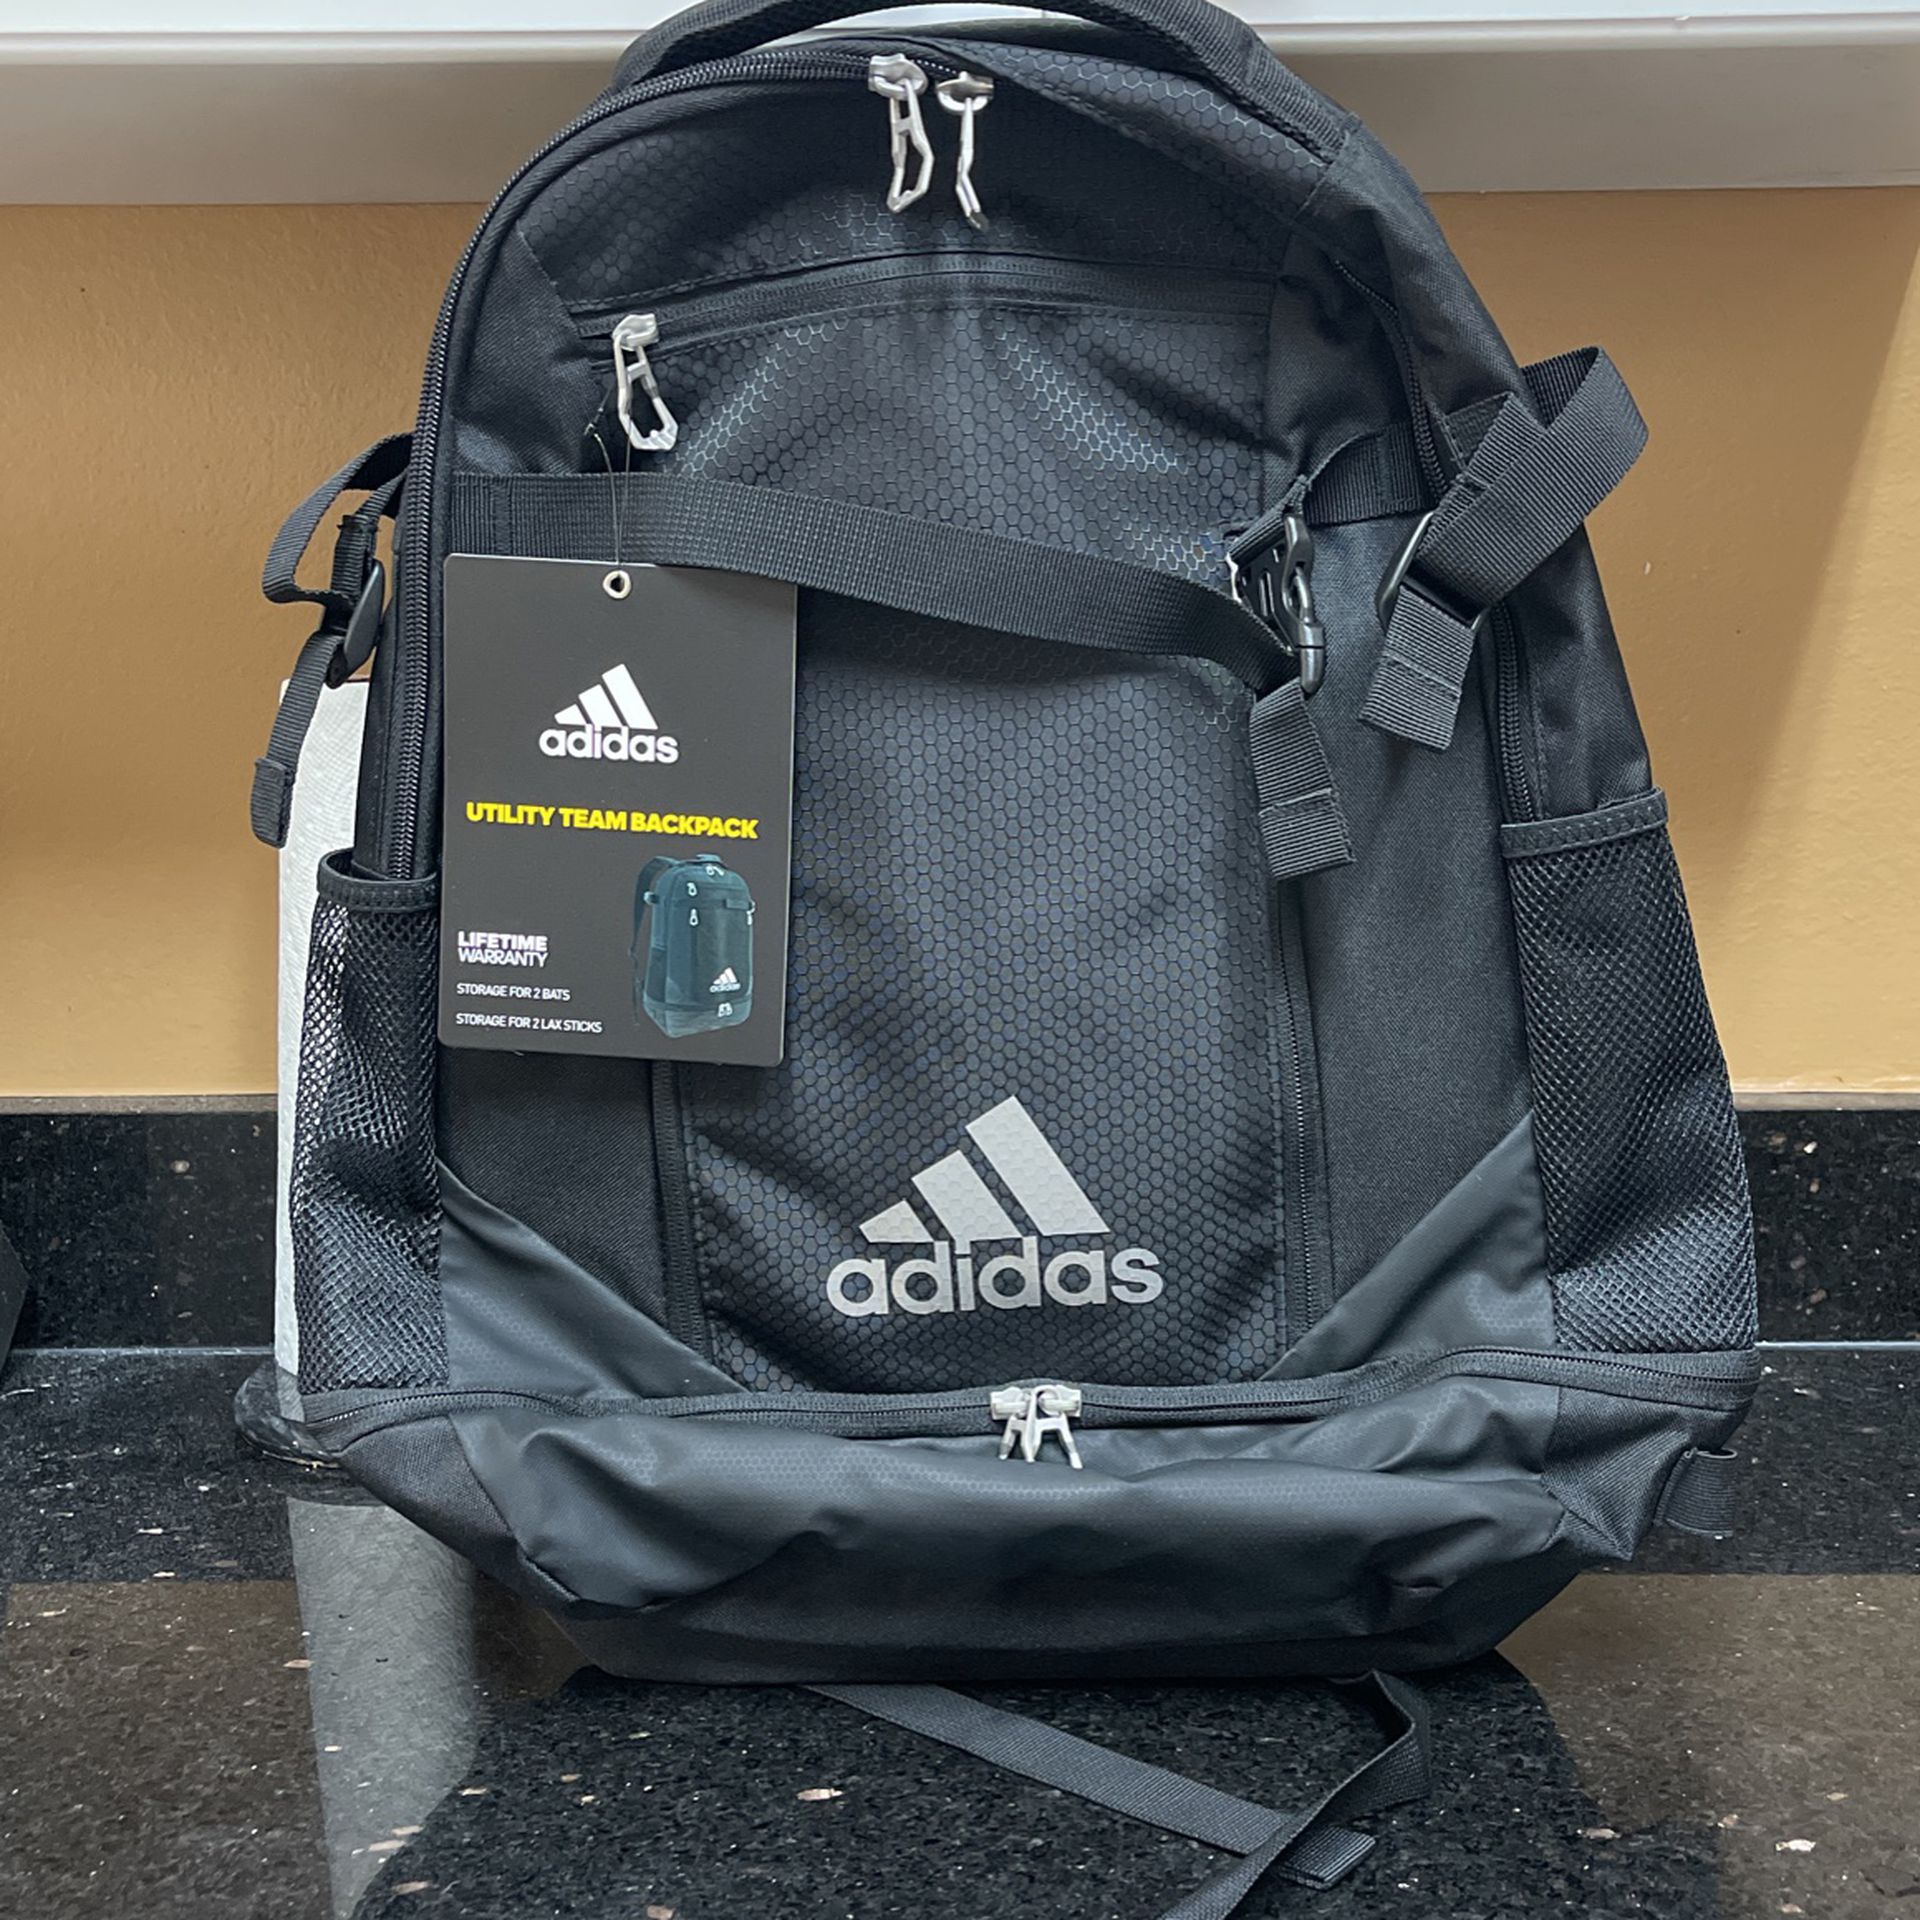 ADIDAS UTILITY BACKPACK BRAND NEW 